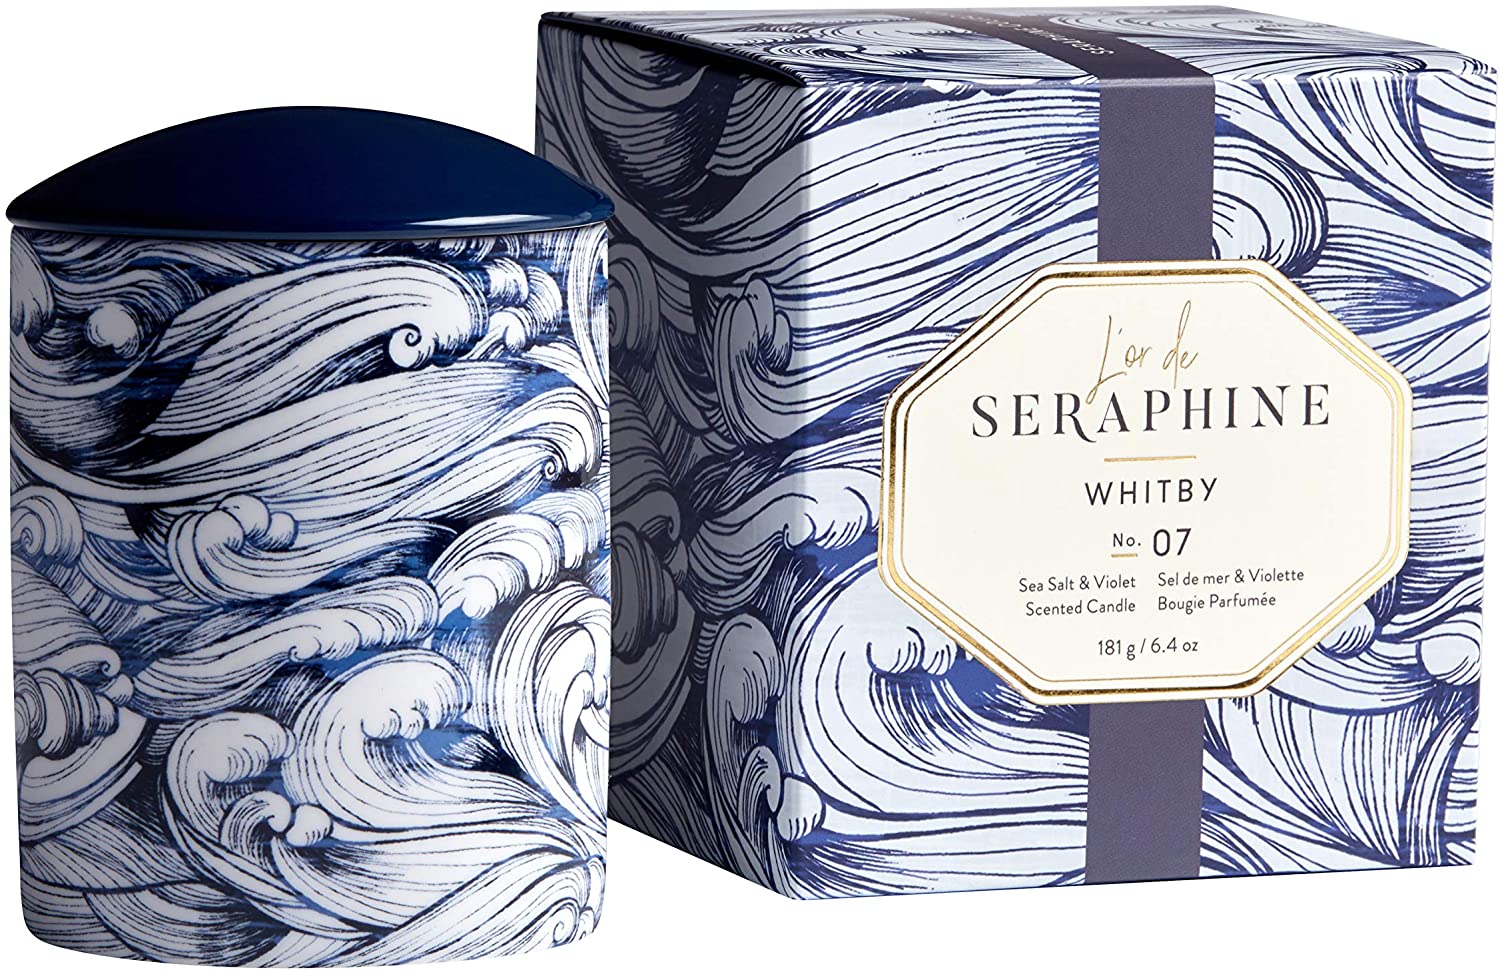 L'or de Seraphine No. 07 Scented Candle Whitby Ceramic Jar